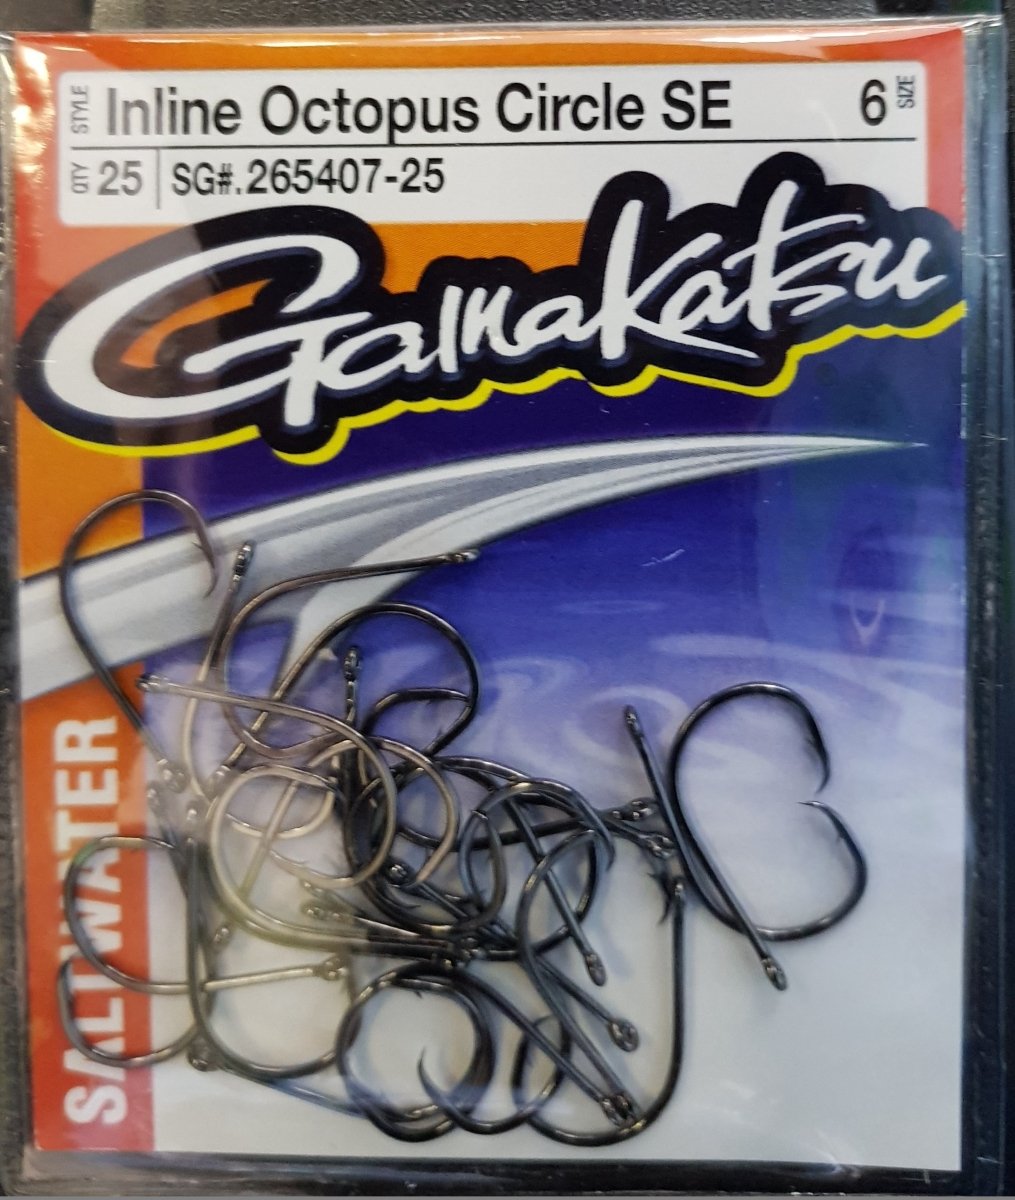 GAMAKATSU Inline Octopus Circle SE Value Pack (25 Piece) - Bait Tackle Store